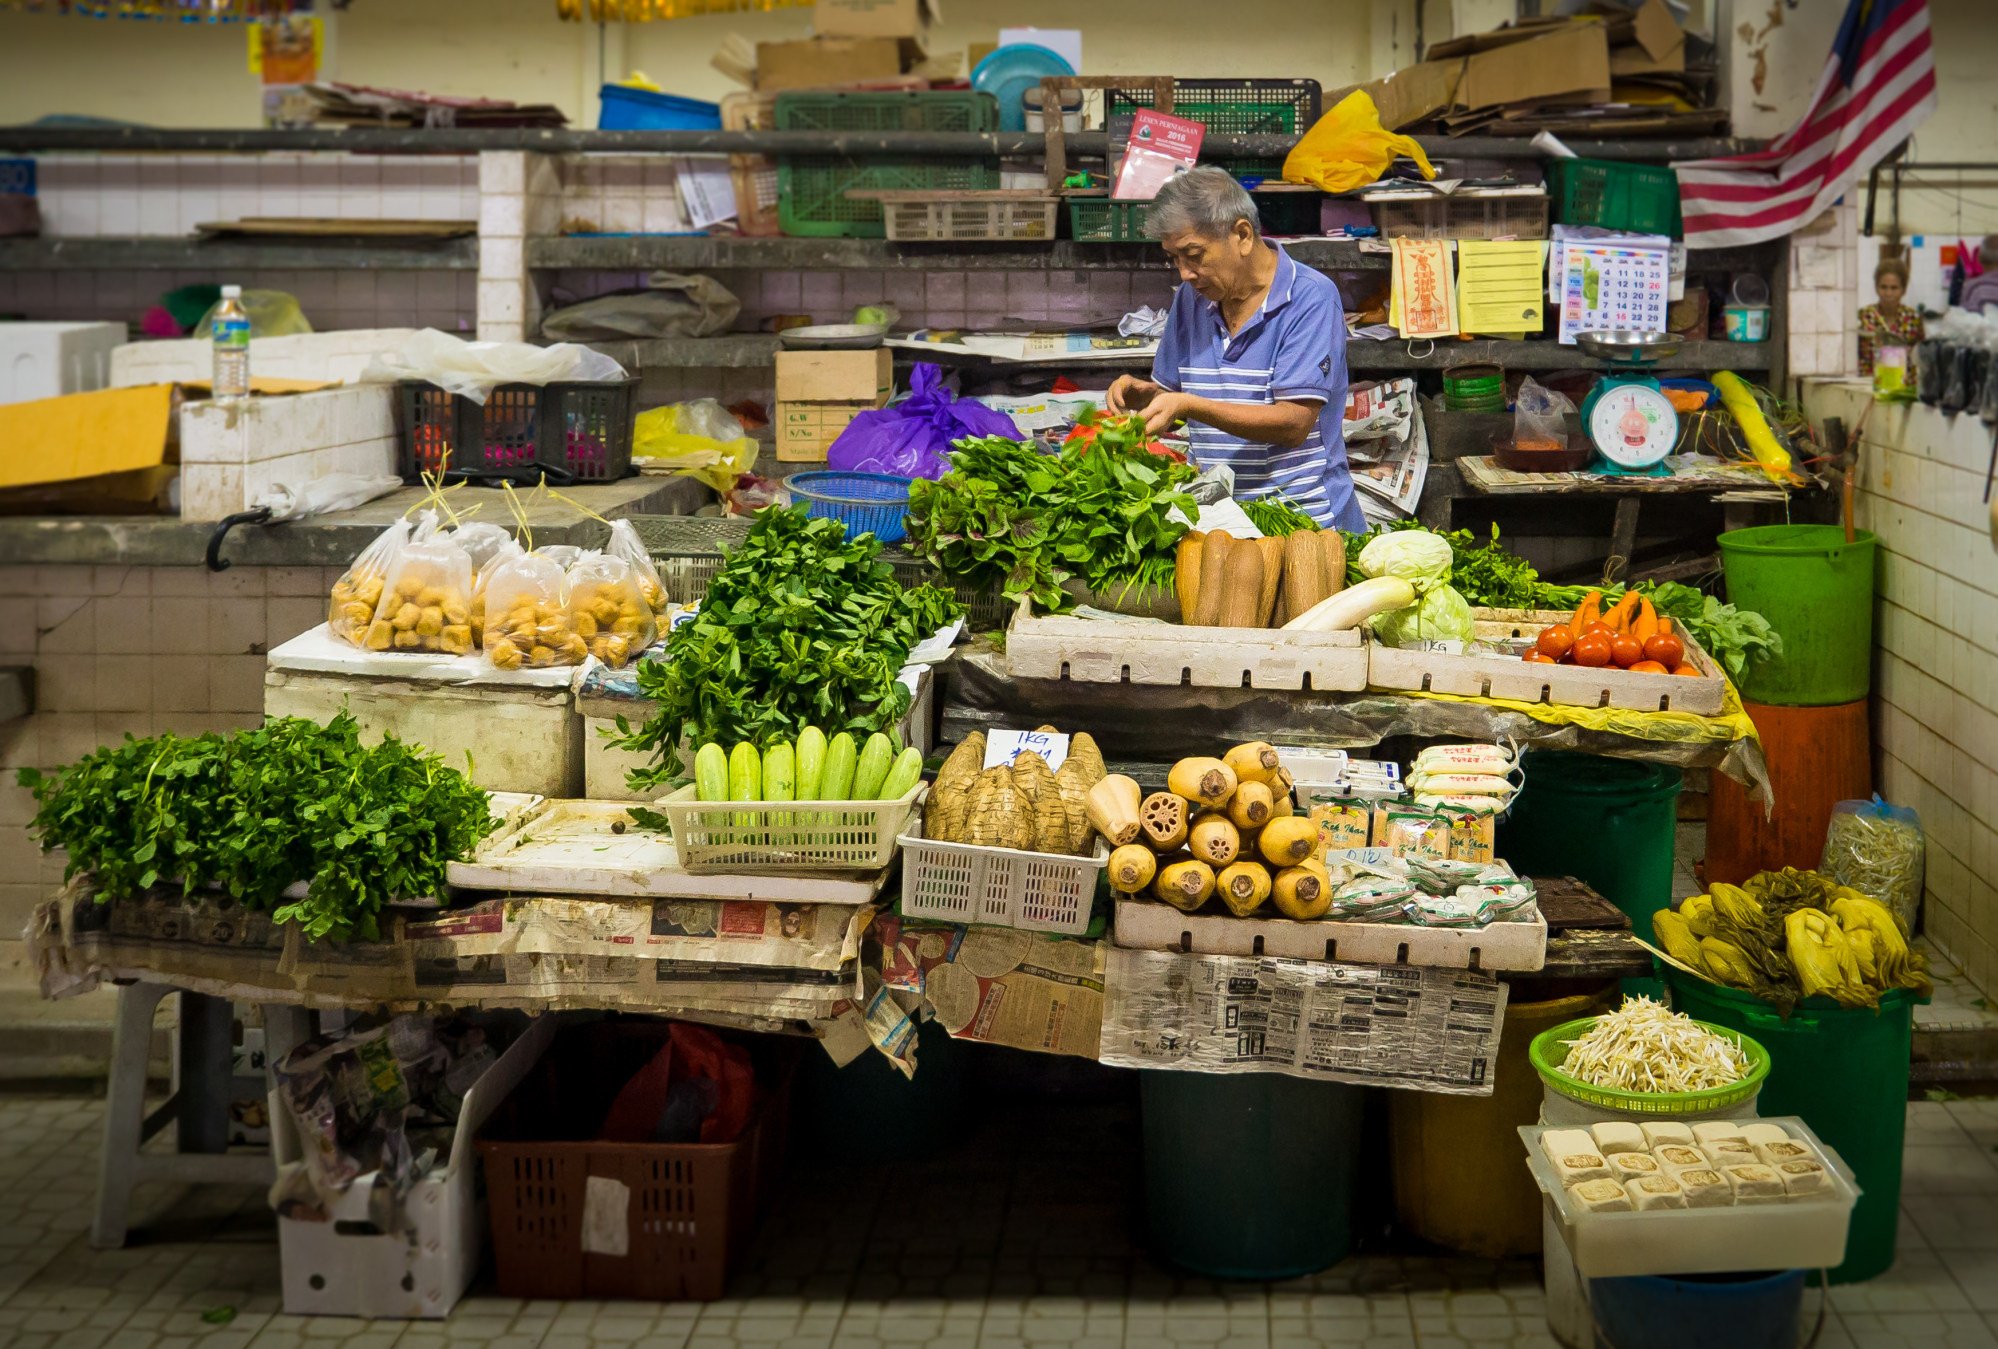 A vendor sells vegetables and fruits in Pahang, Malaysia. Photo: Shutterstock